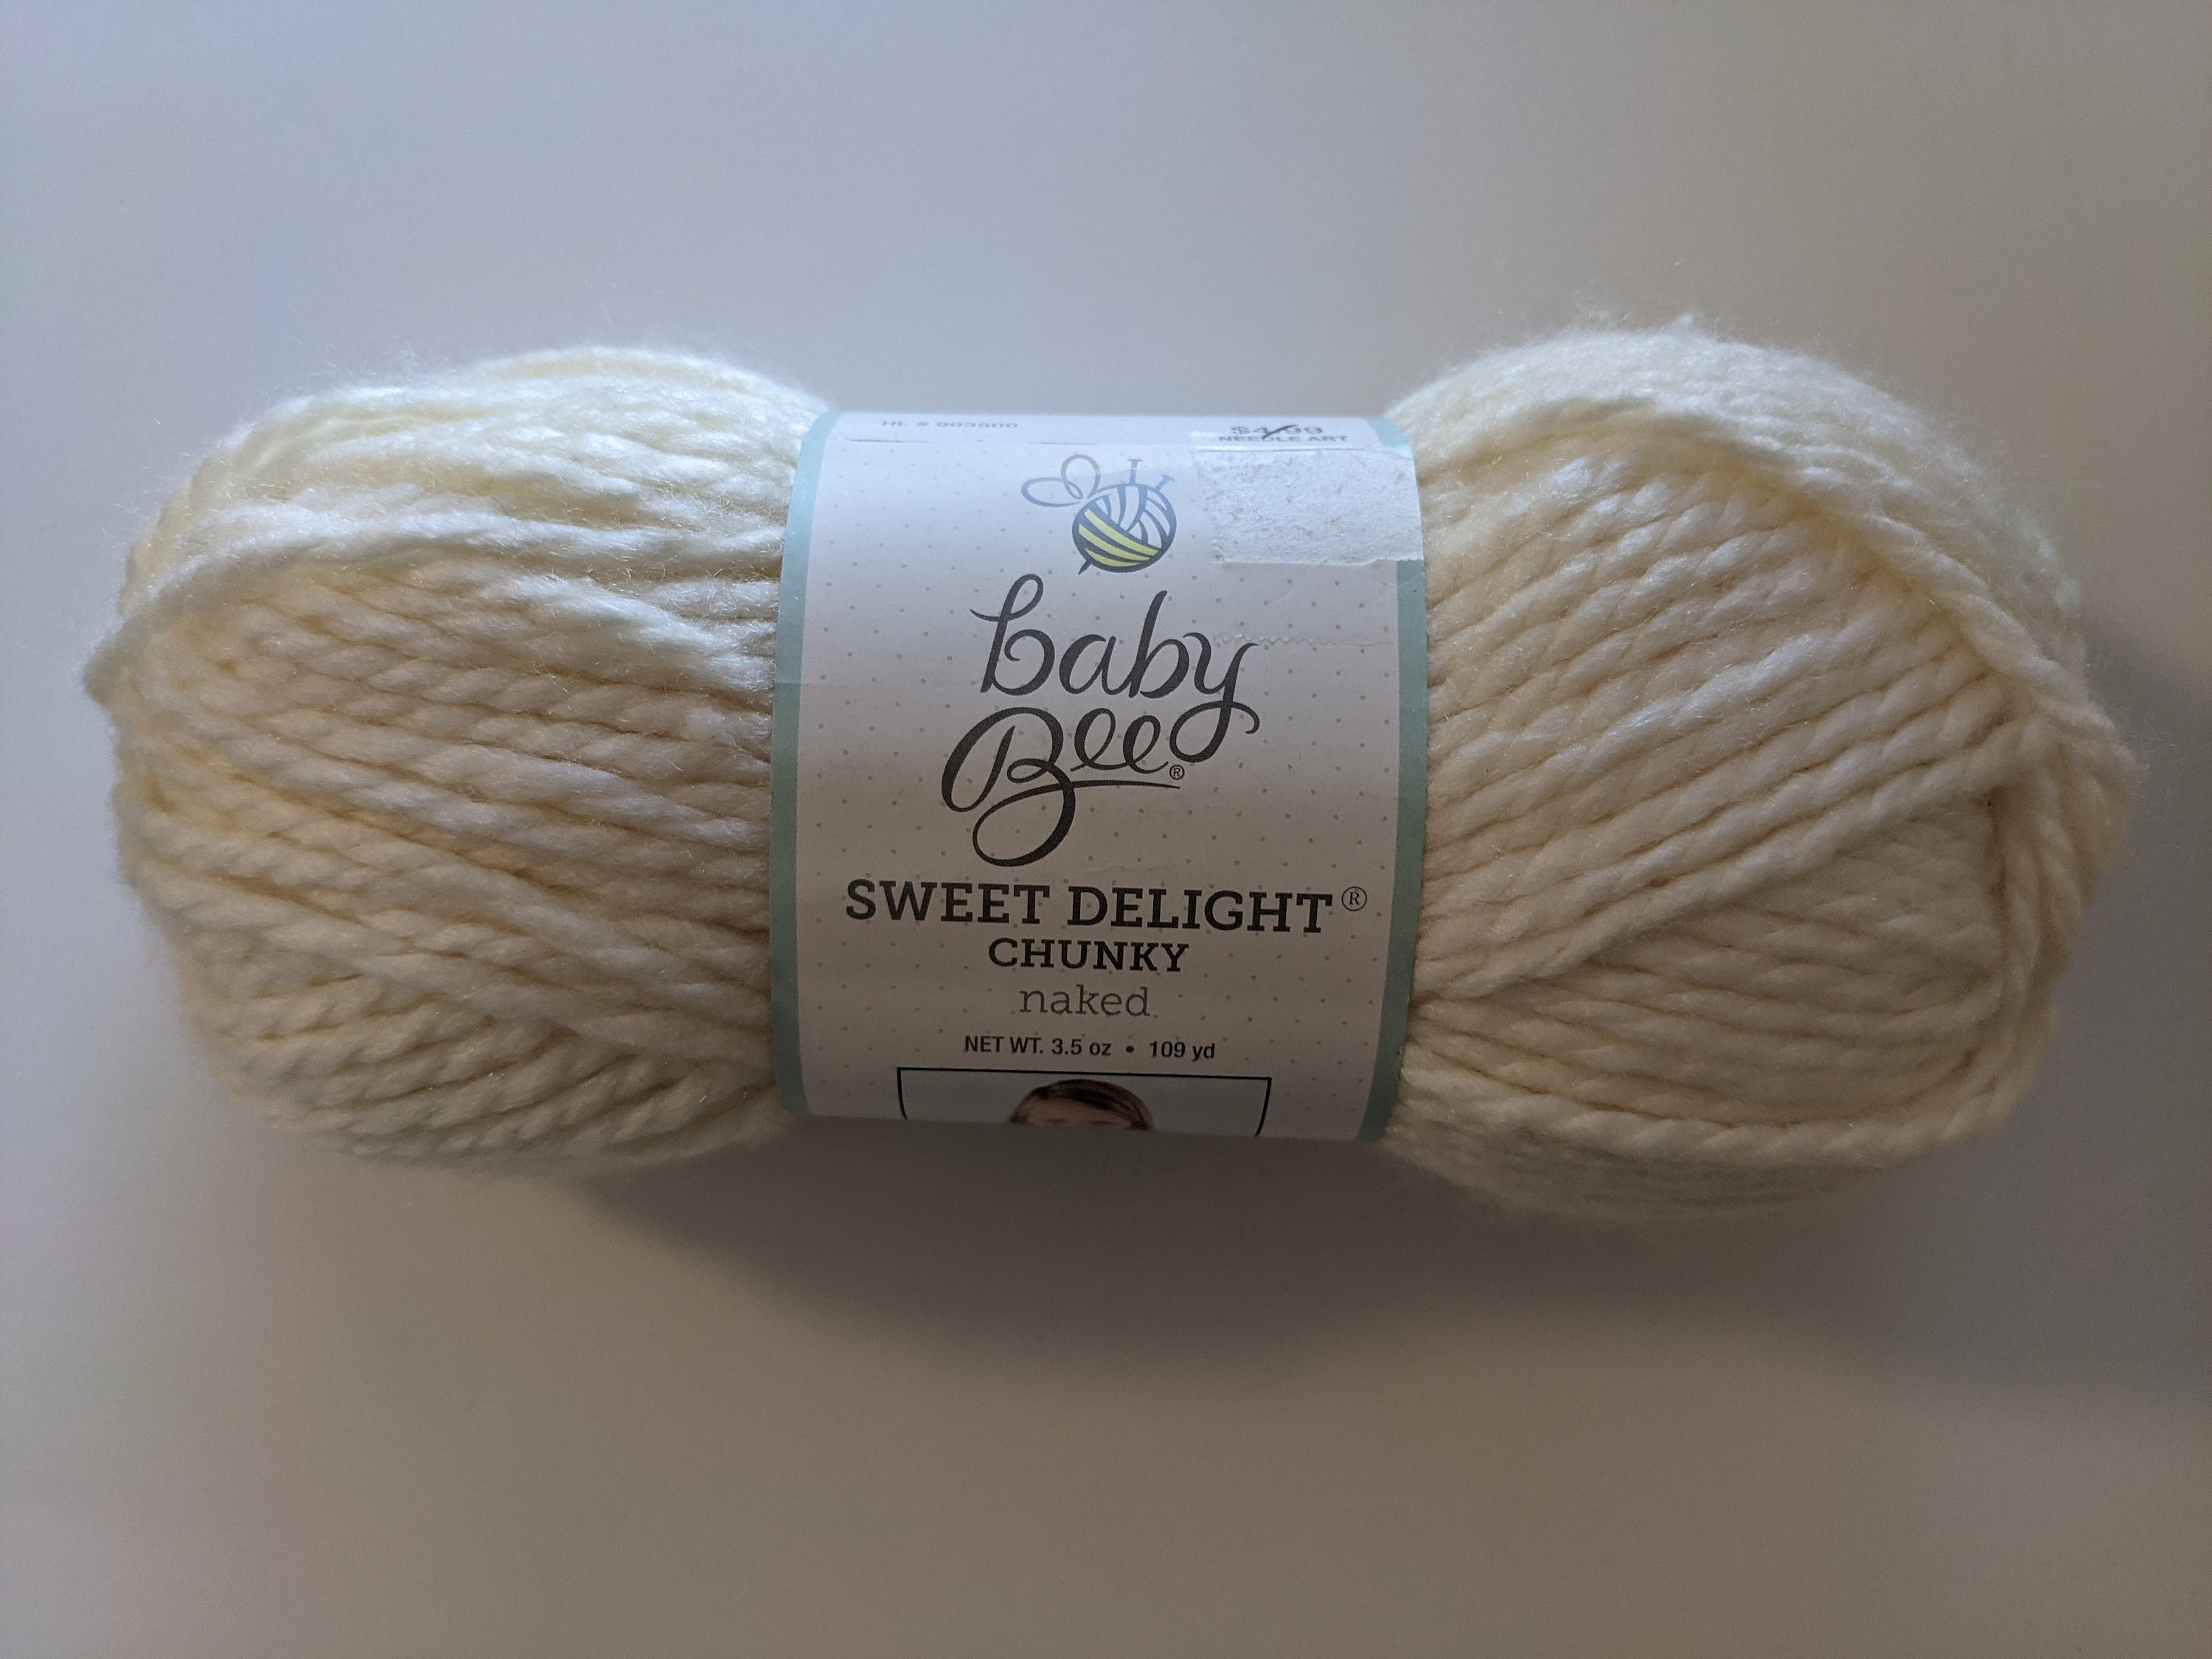 Lot of 5 Rolls of Baby Bee Yarn - Color Babys Blue - Dutch Goat